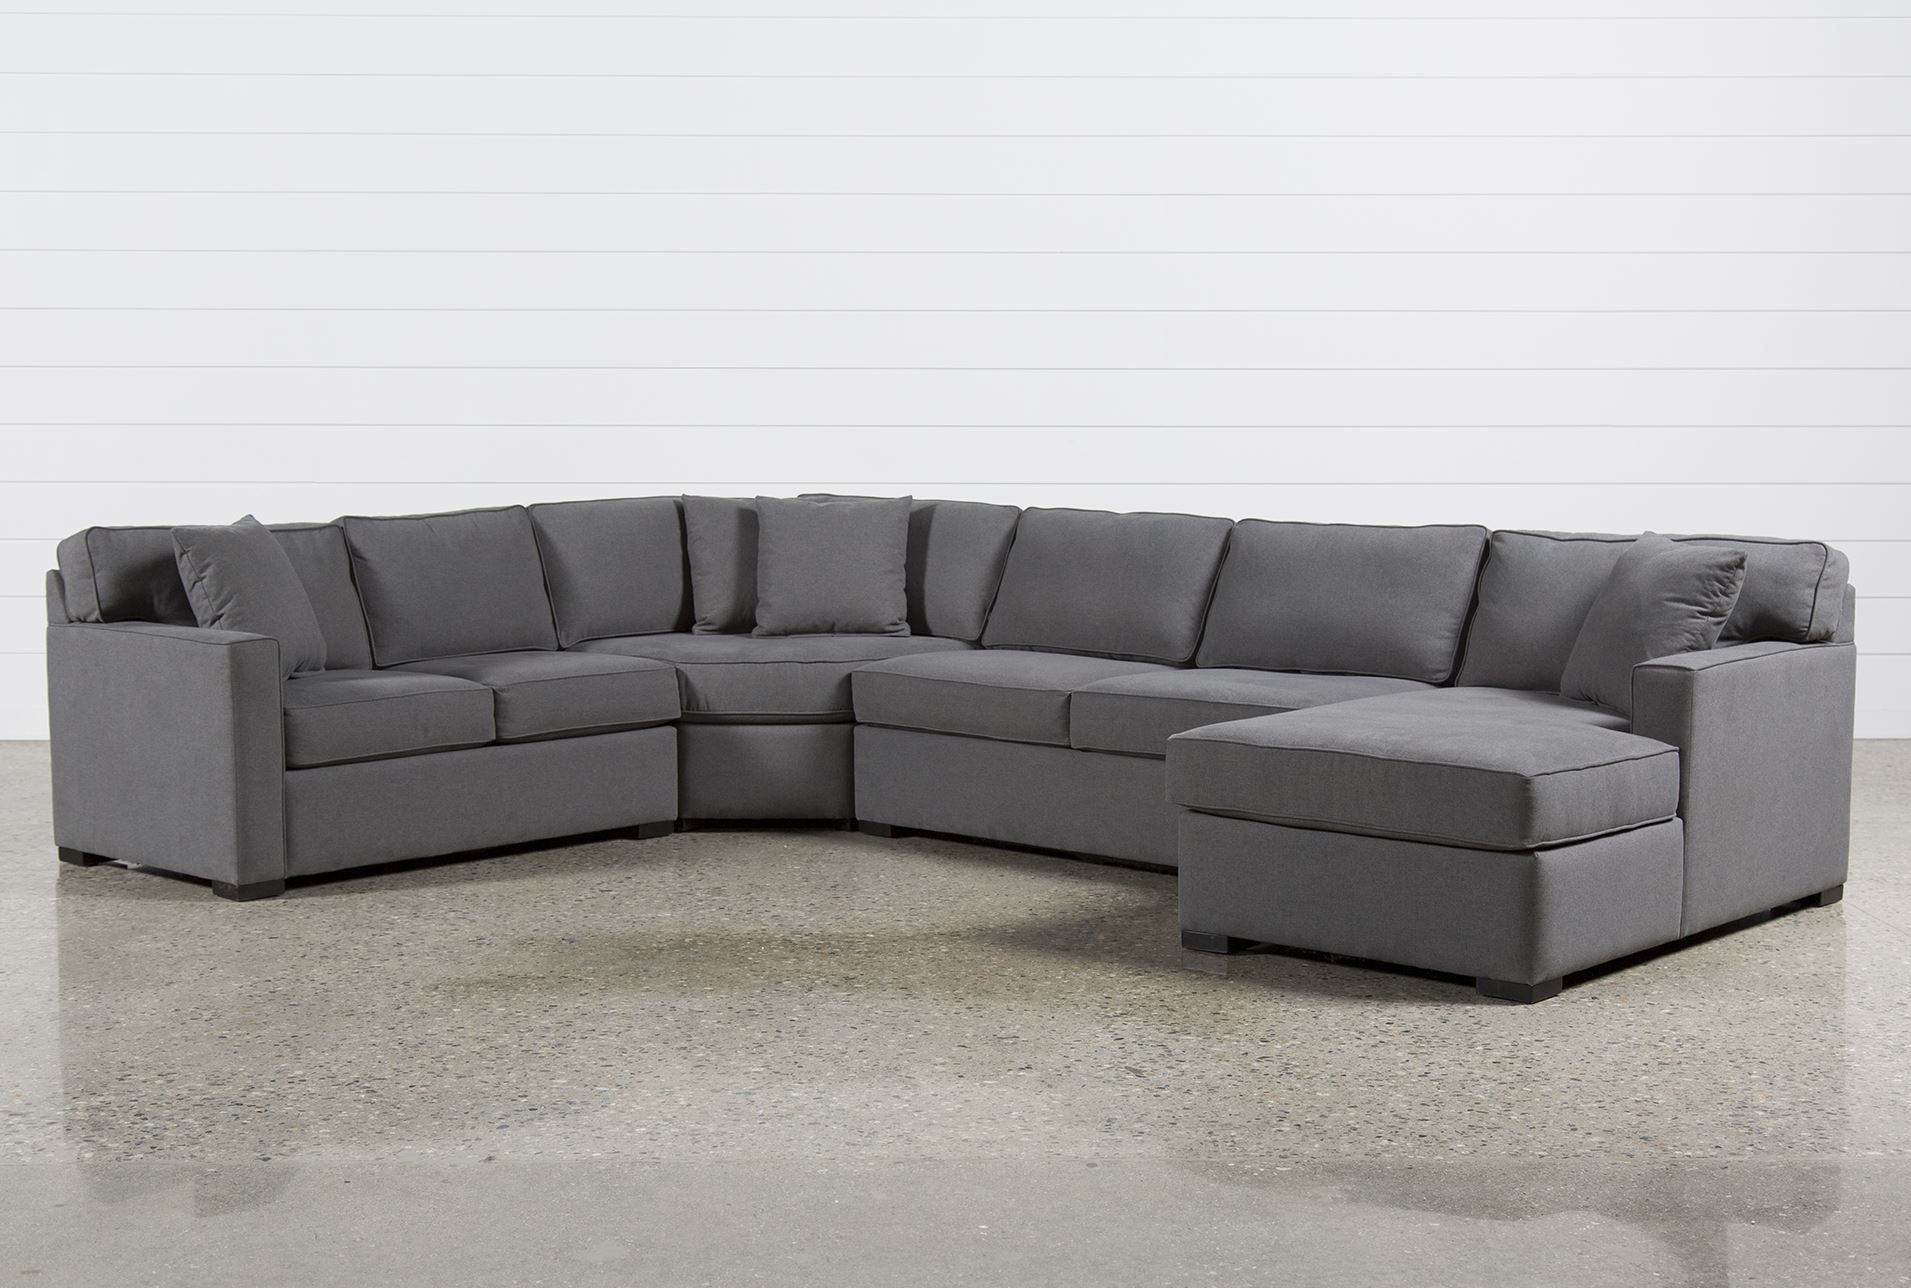 Stunning 45 Degree Sectional Sofa 50 In Motion Sectional Sofas With Regard To 45 Degree Sectional Sofa (Photo 3 of 15)